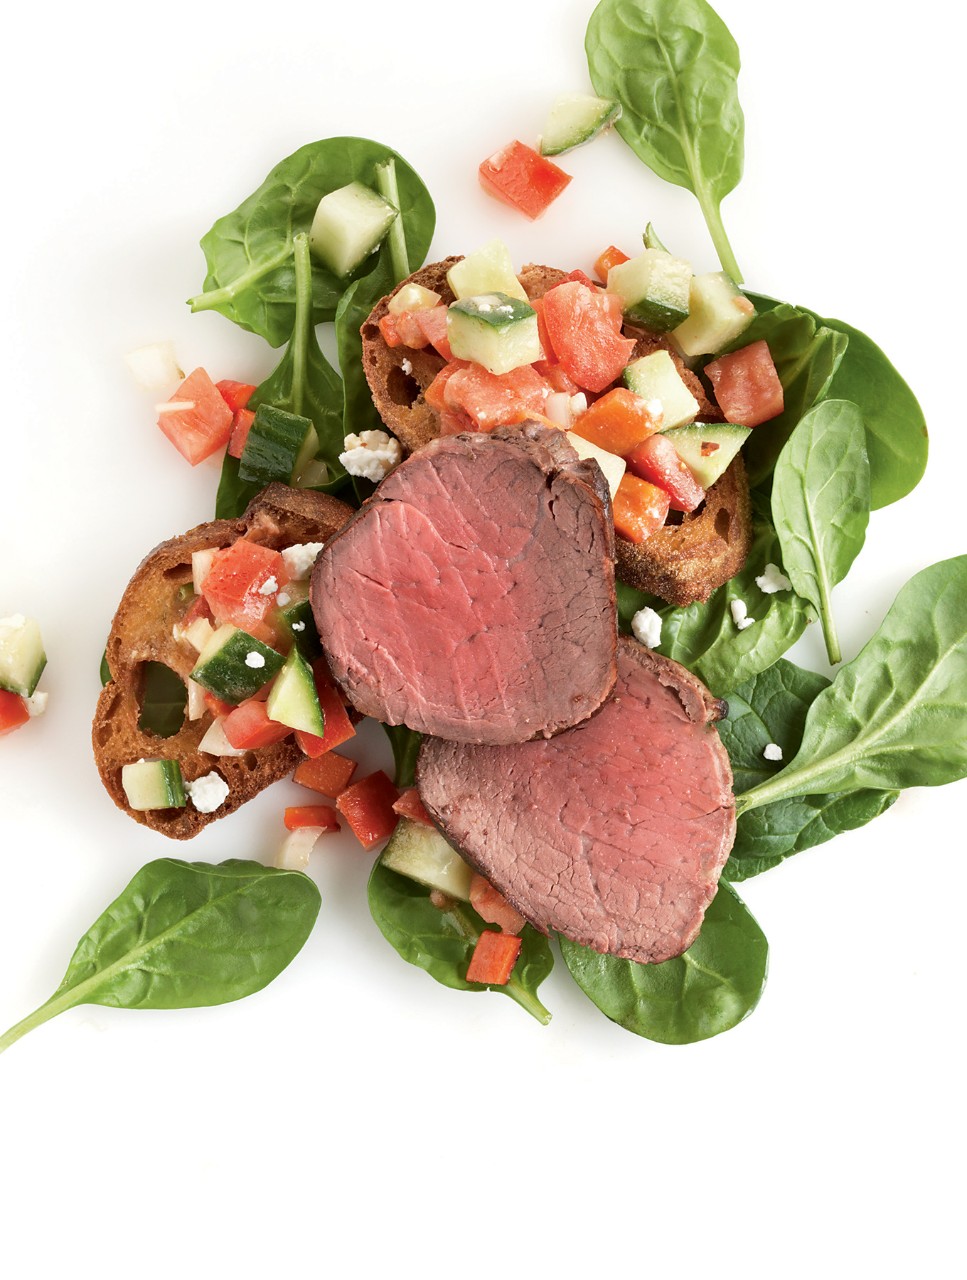 Seared Beef & Spinach Panzanella Salad with Feta Dressing